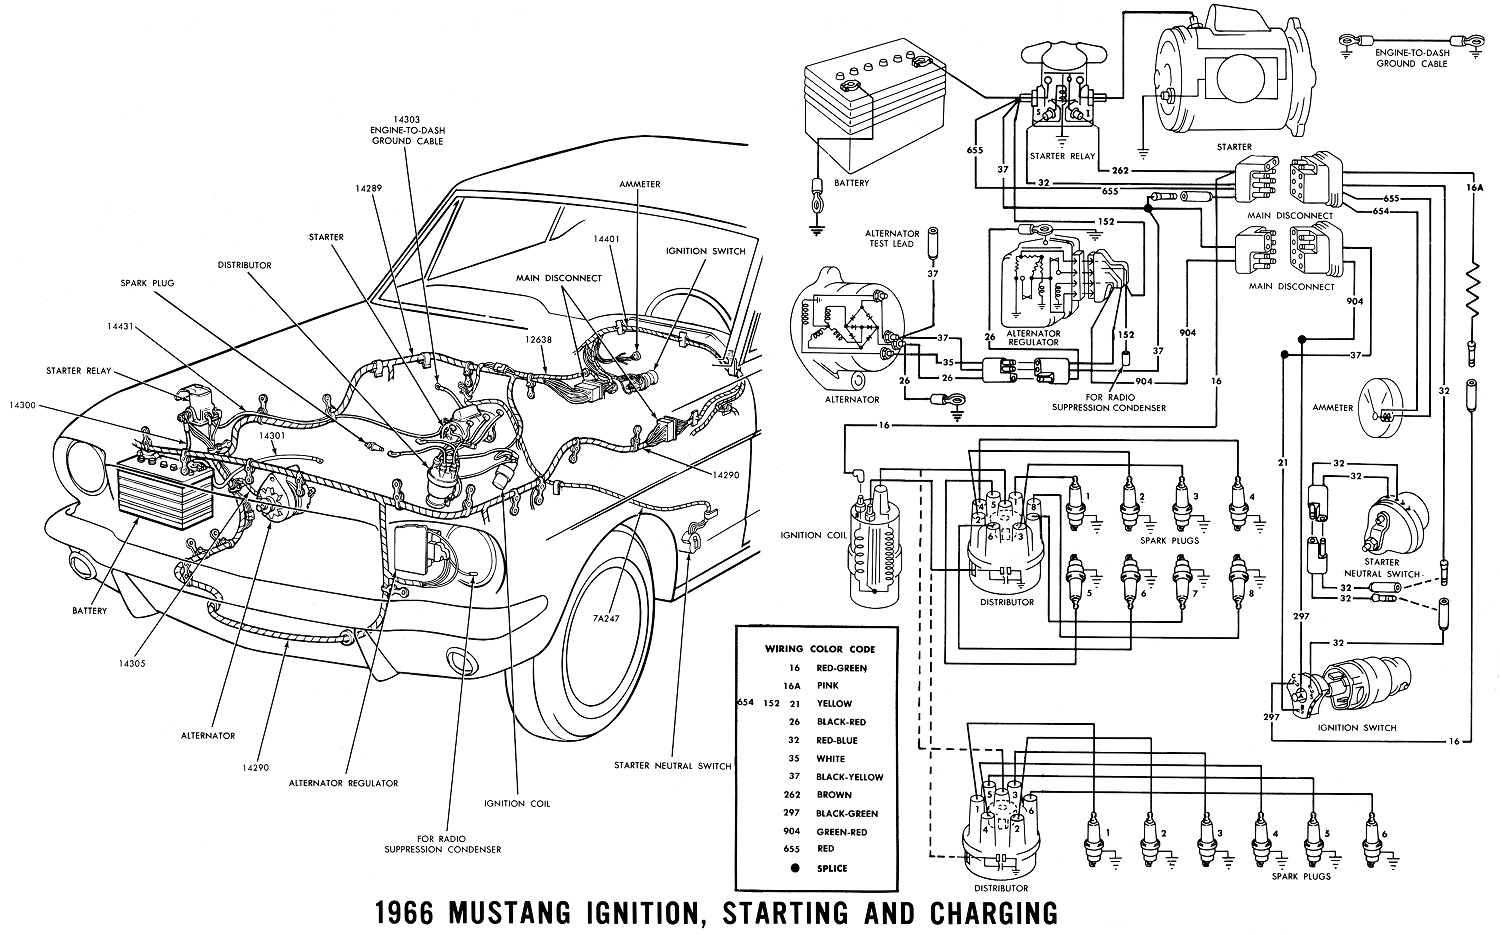 1966 Mustang Ignition Wiring Diagram Free Auto Wiring Diagram 1966 Mustang Ignition Wiring Diagram